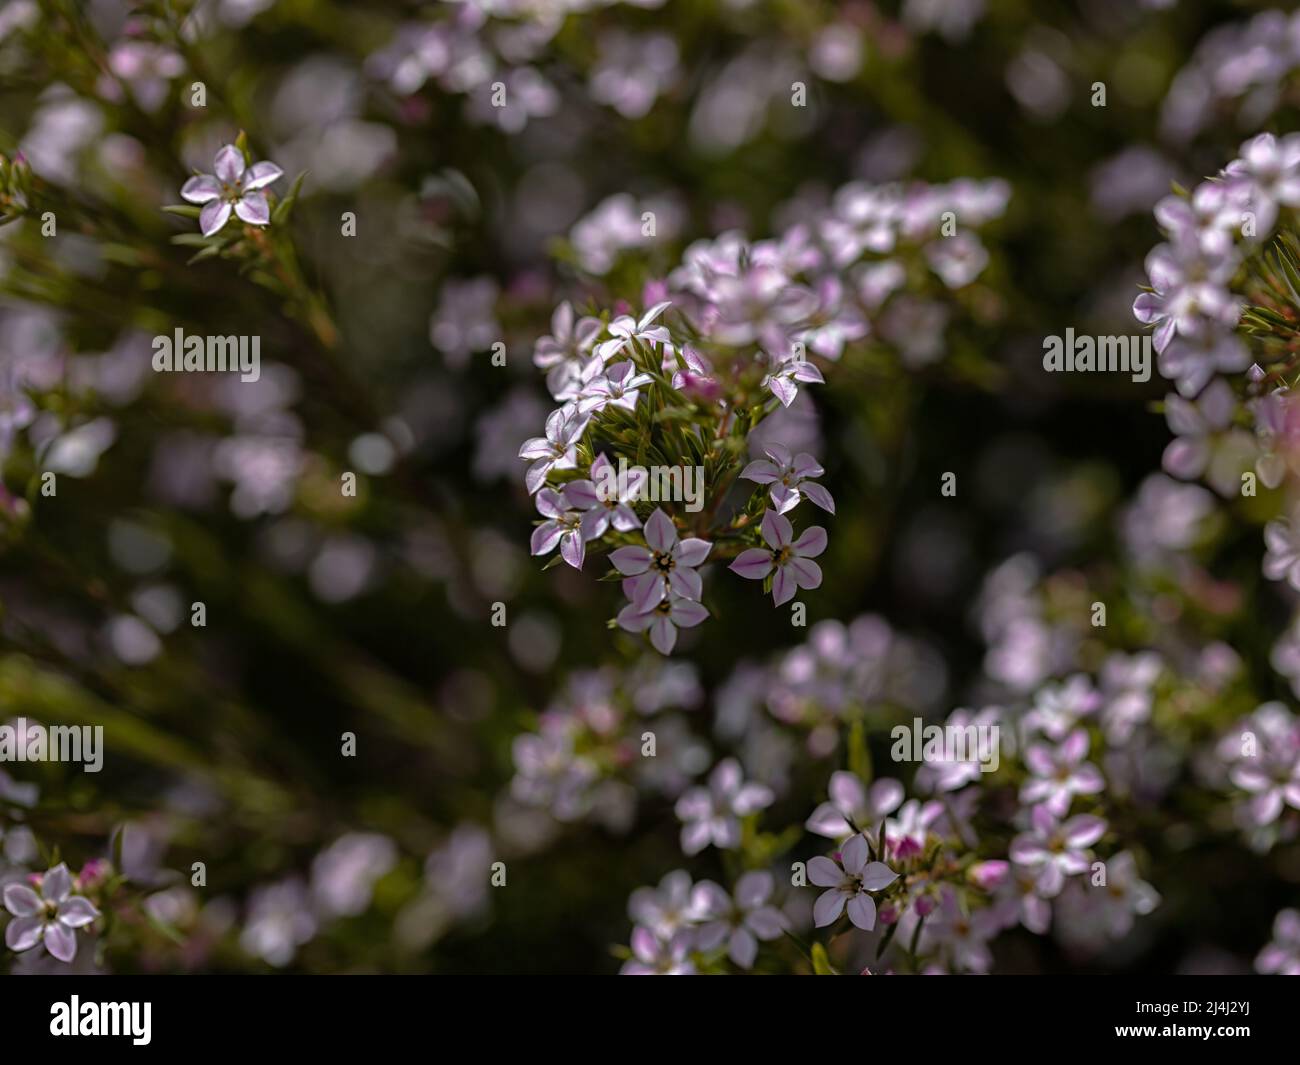 Closeup of flowers of Coleonema pulchellum 'Pink Fountain' in a garden in Spring Stock Photo